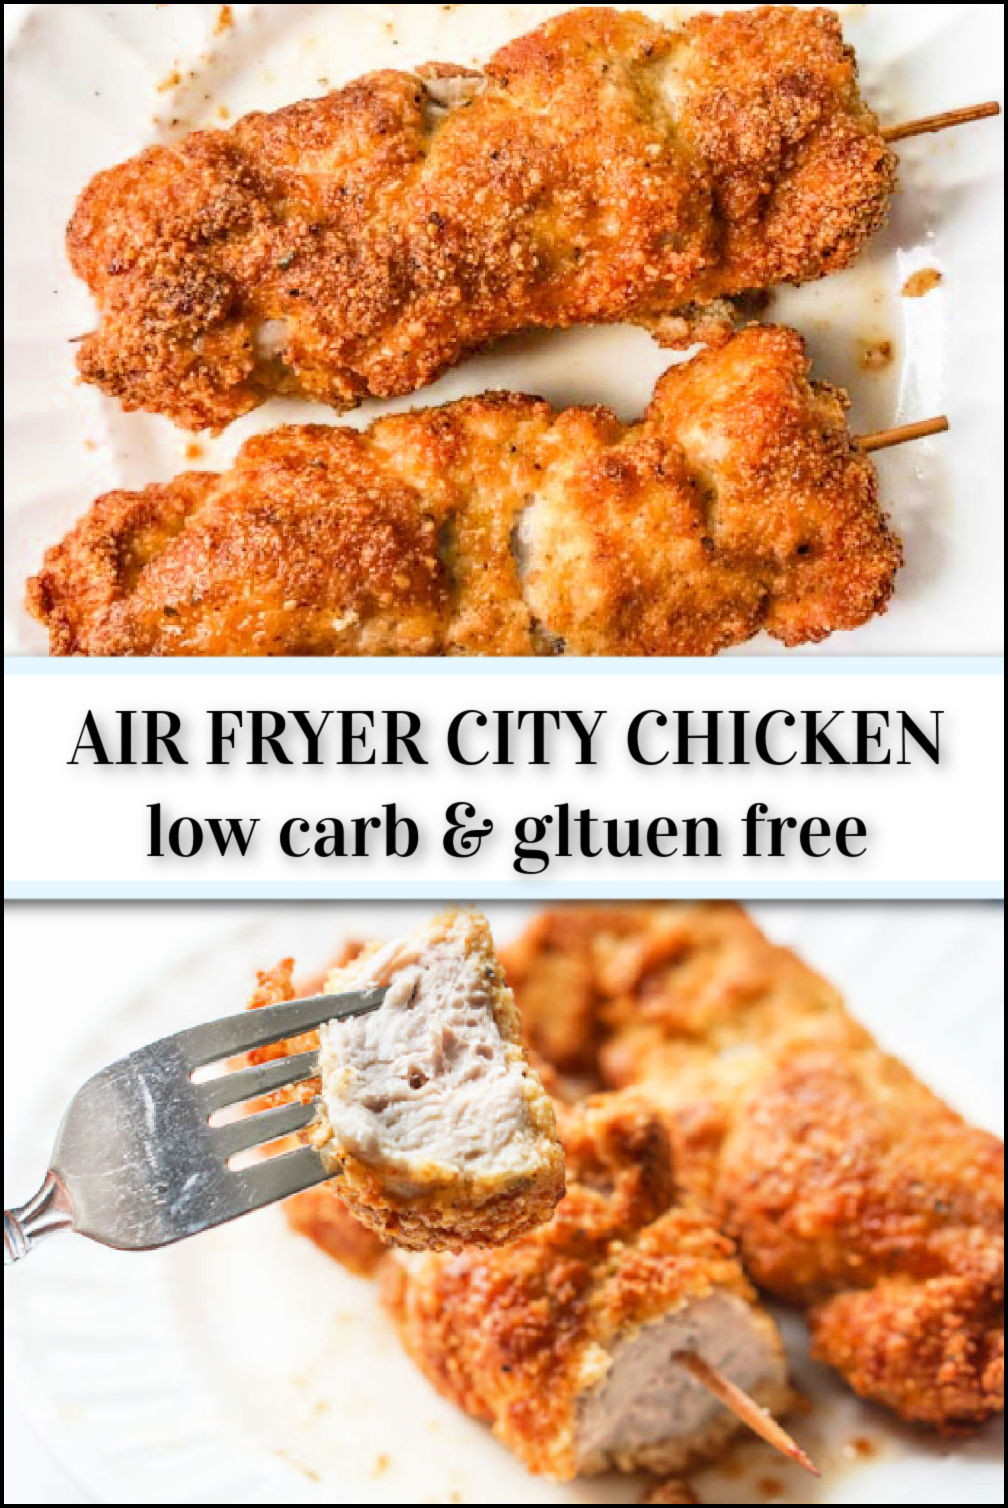 white plates of low carb city chicken with text